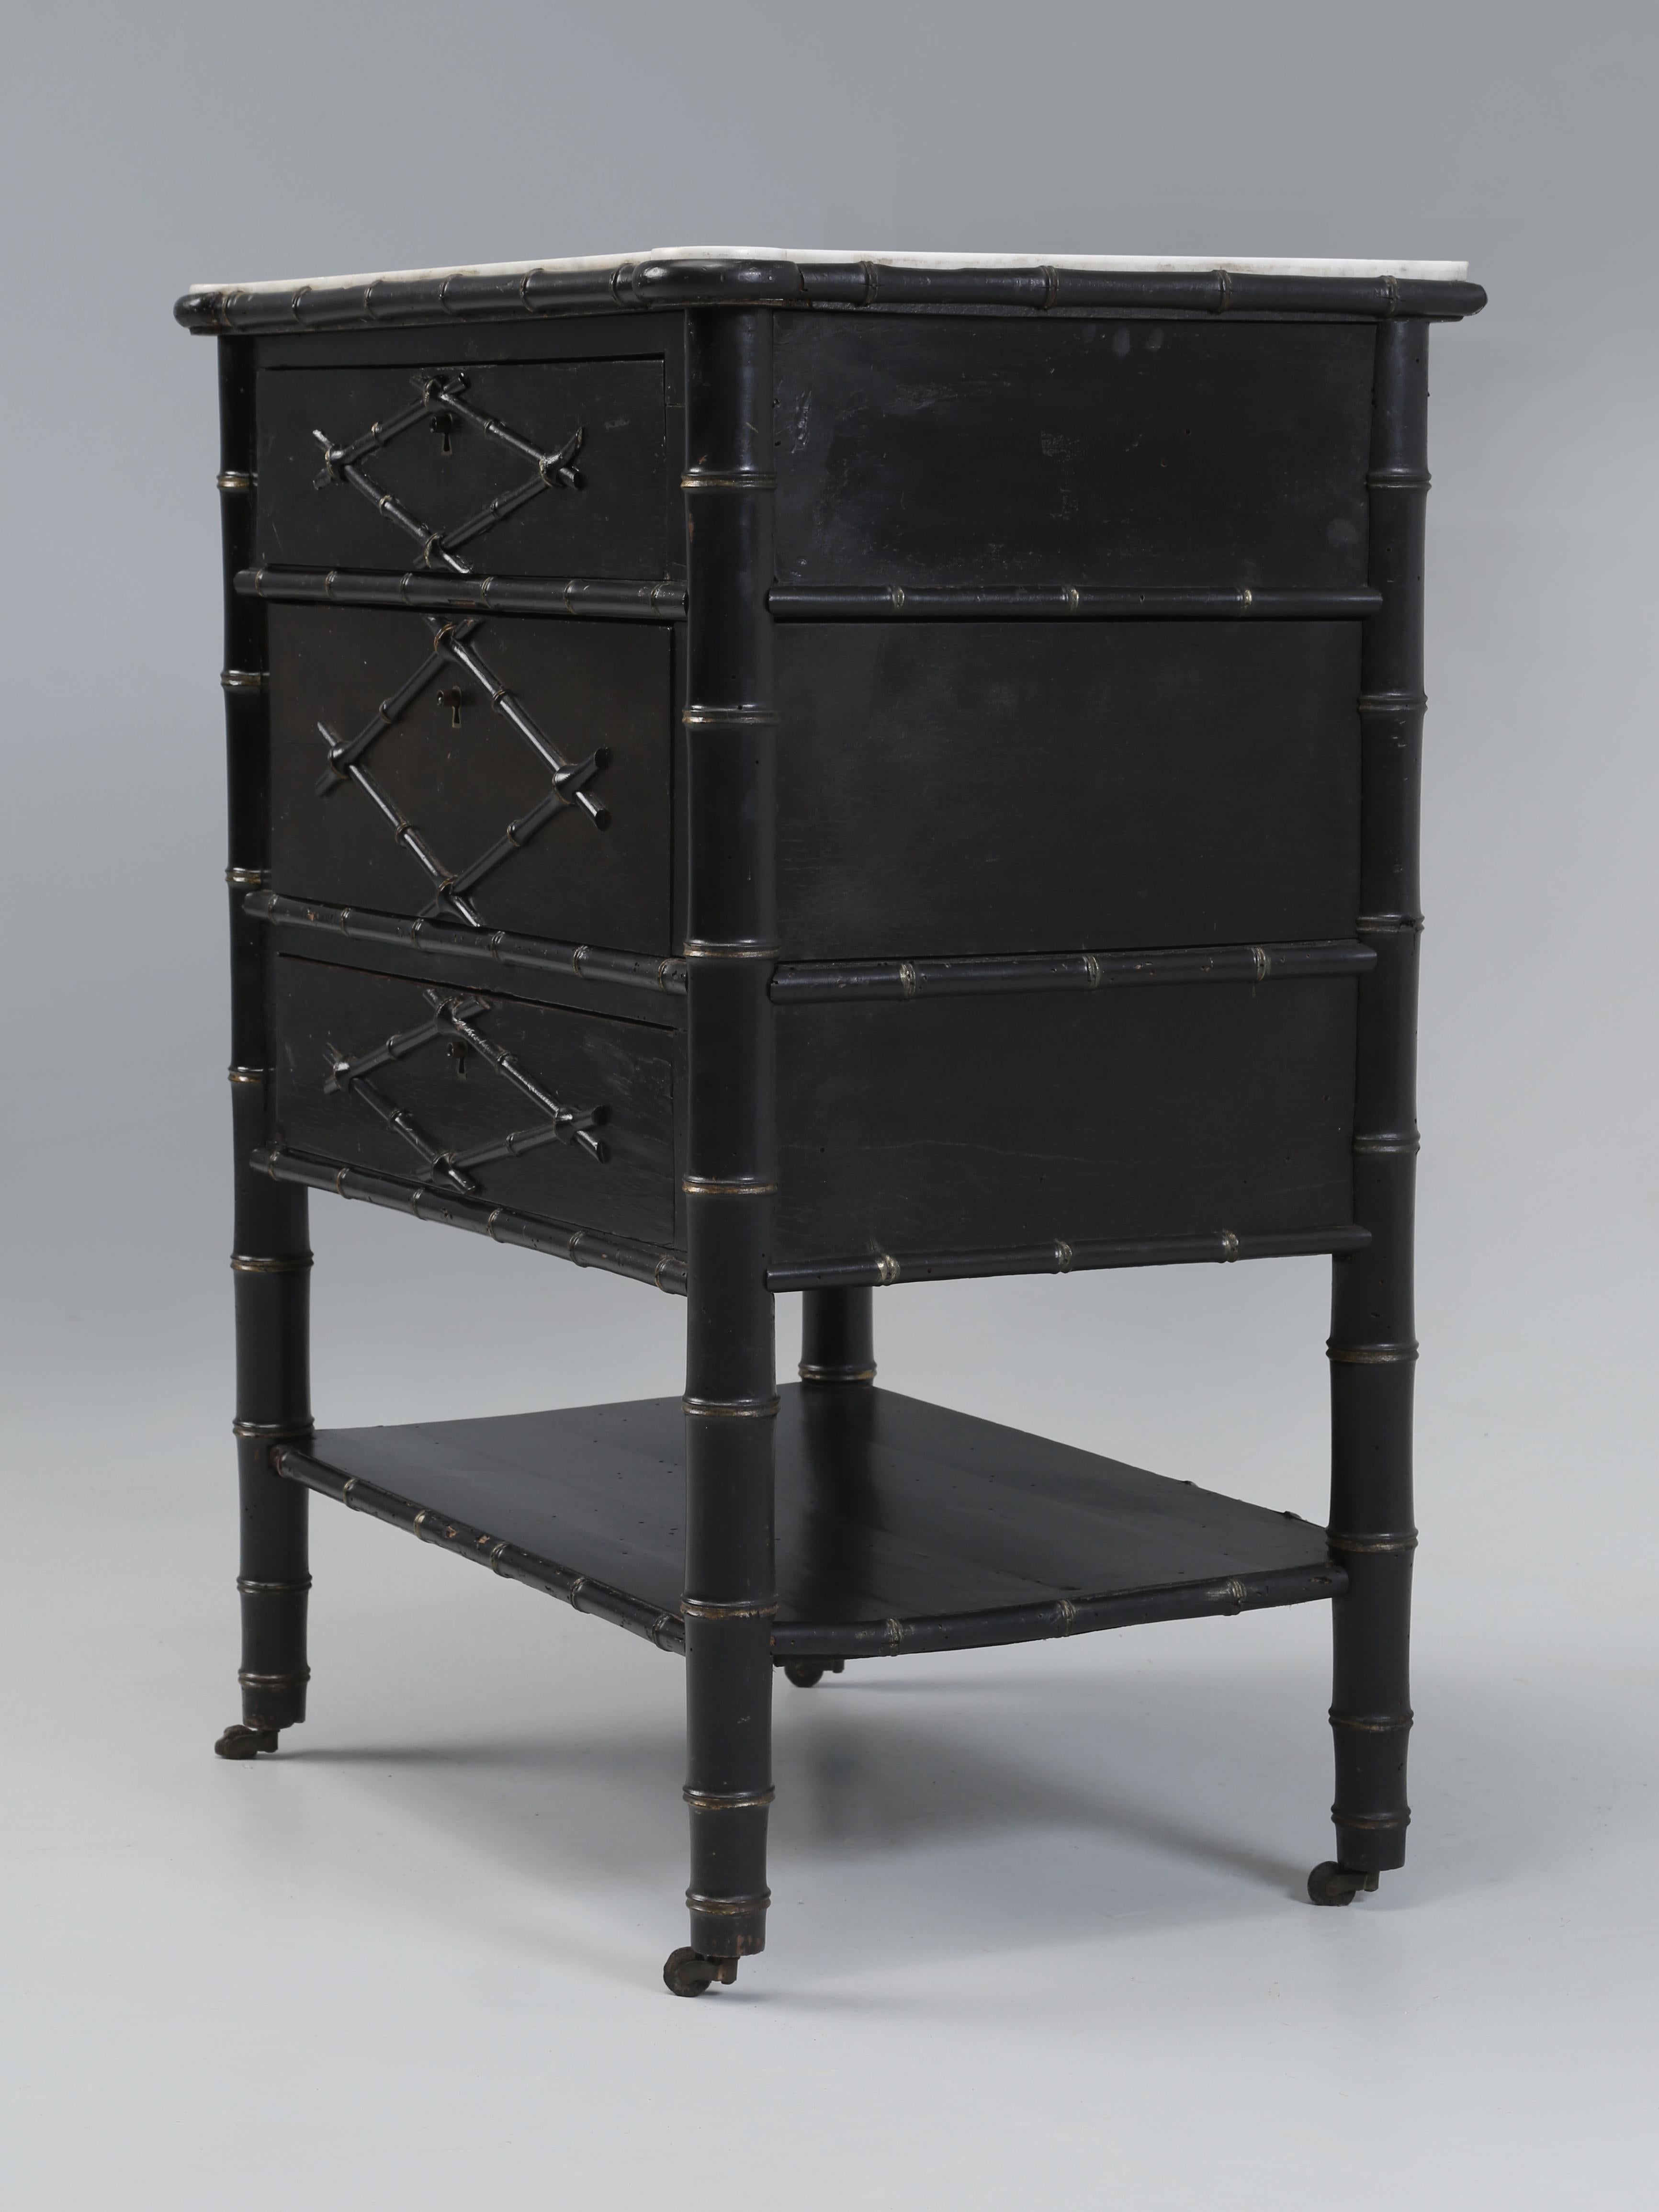 Antique French Petite Dresser, Commode, or Night Stand in a classic Faux Bamboo style, however what sets this particular small cabinet apart is the attention to the smallest details. The quality is exemplified by the act that it’s actually made out